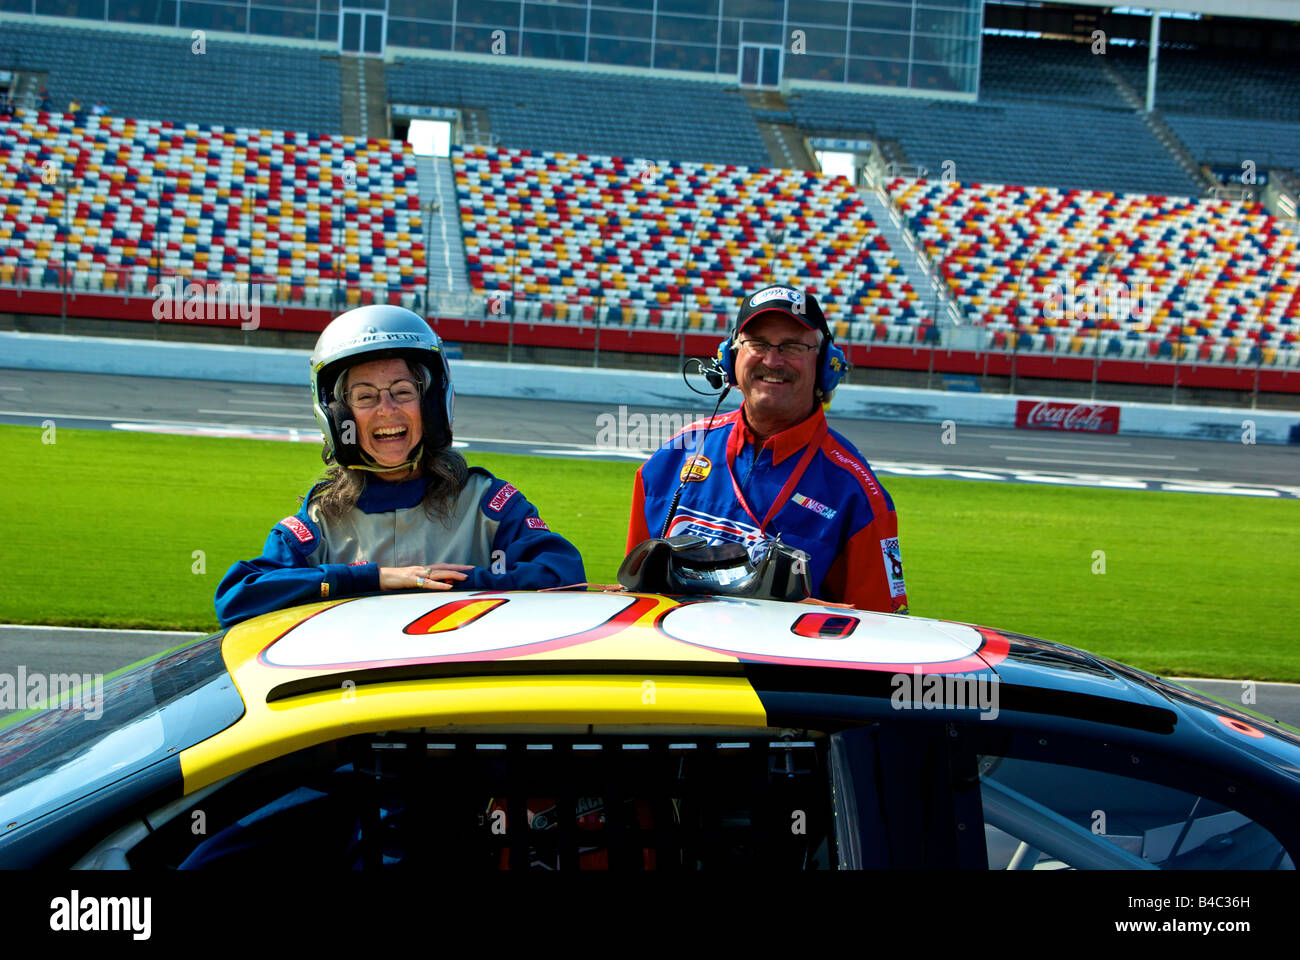 Happy woman racing fan after three hot drive along laps in a NASCAR style racecar at Lowe's Motor Speedway Stock Photo